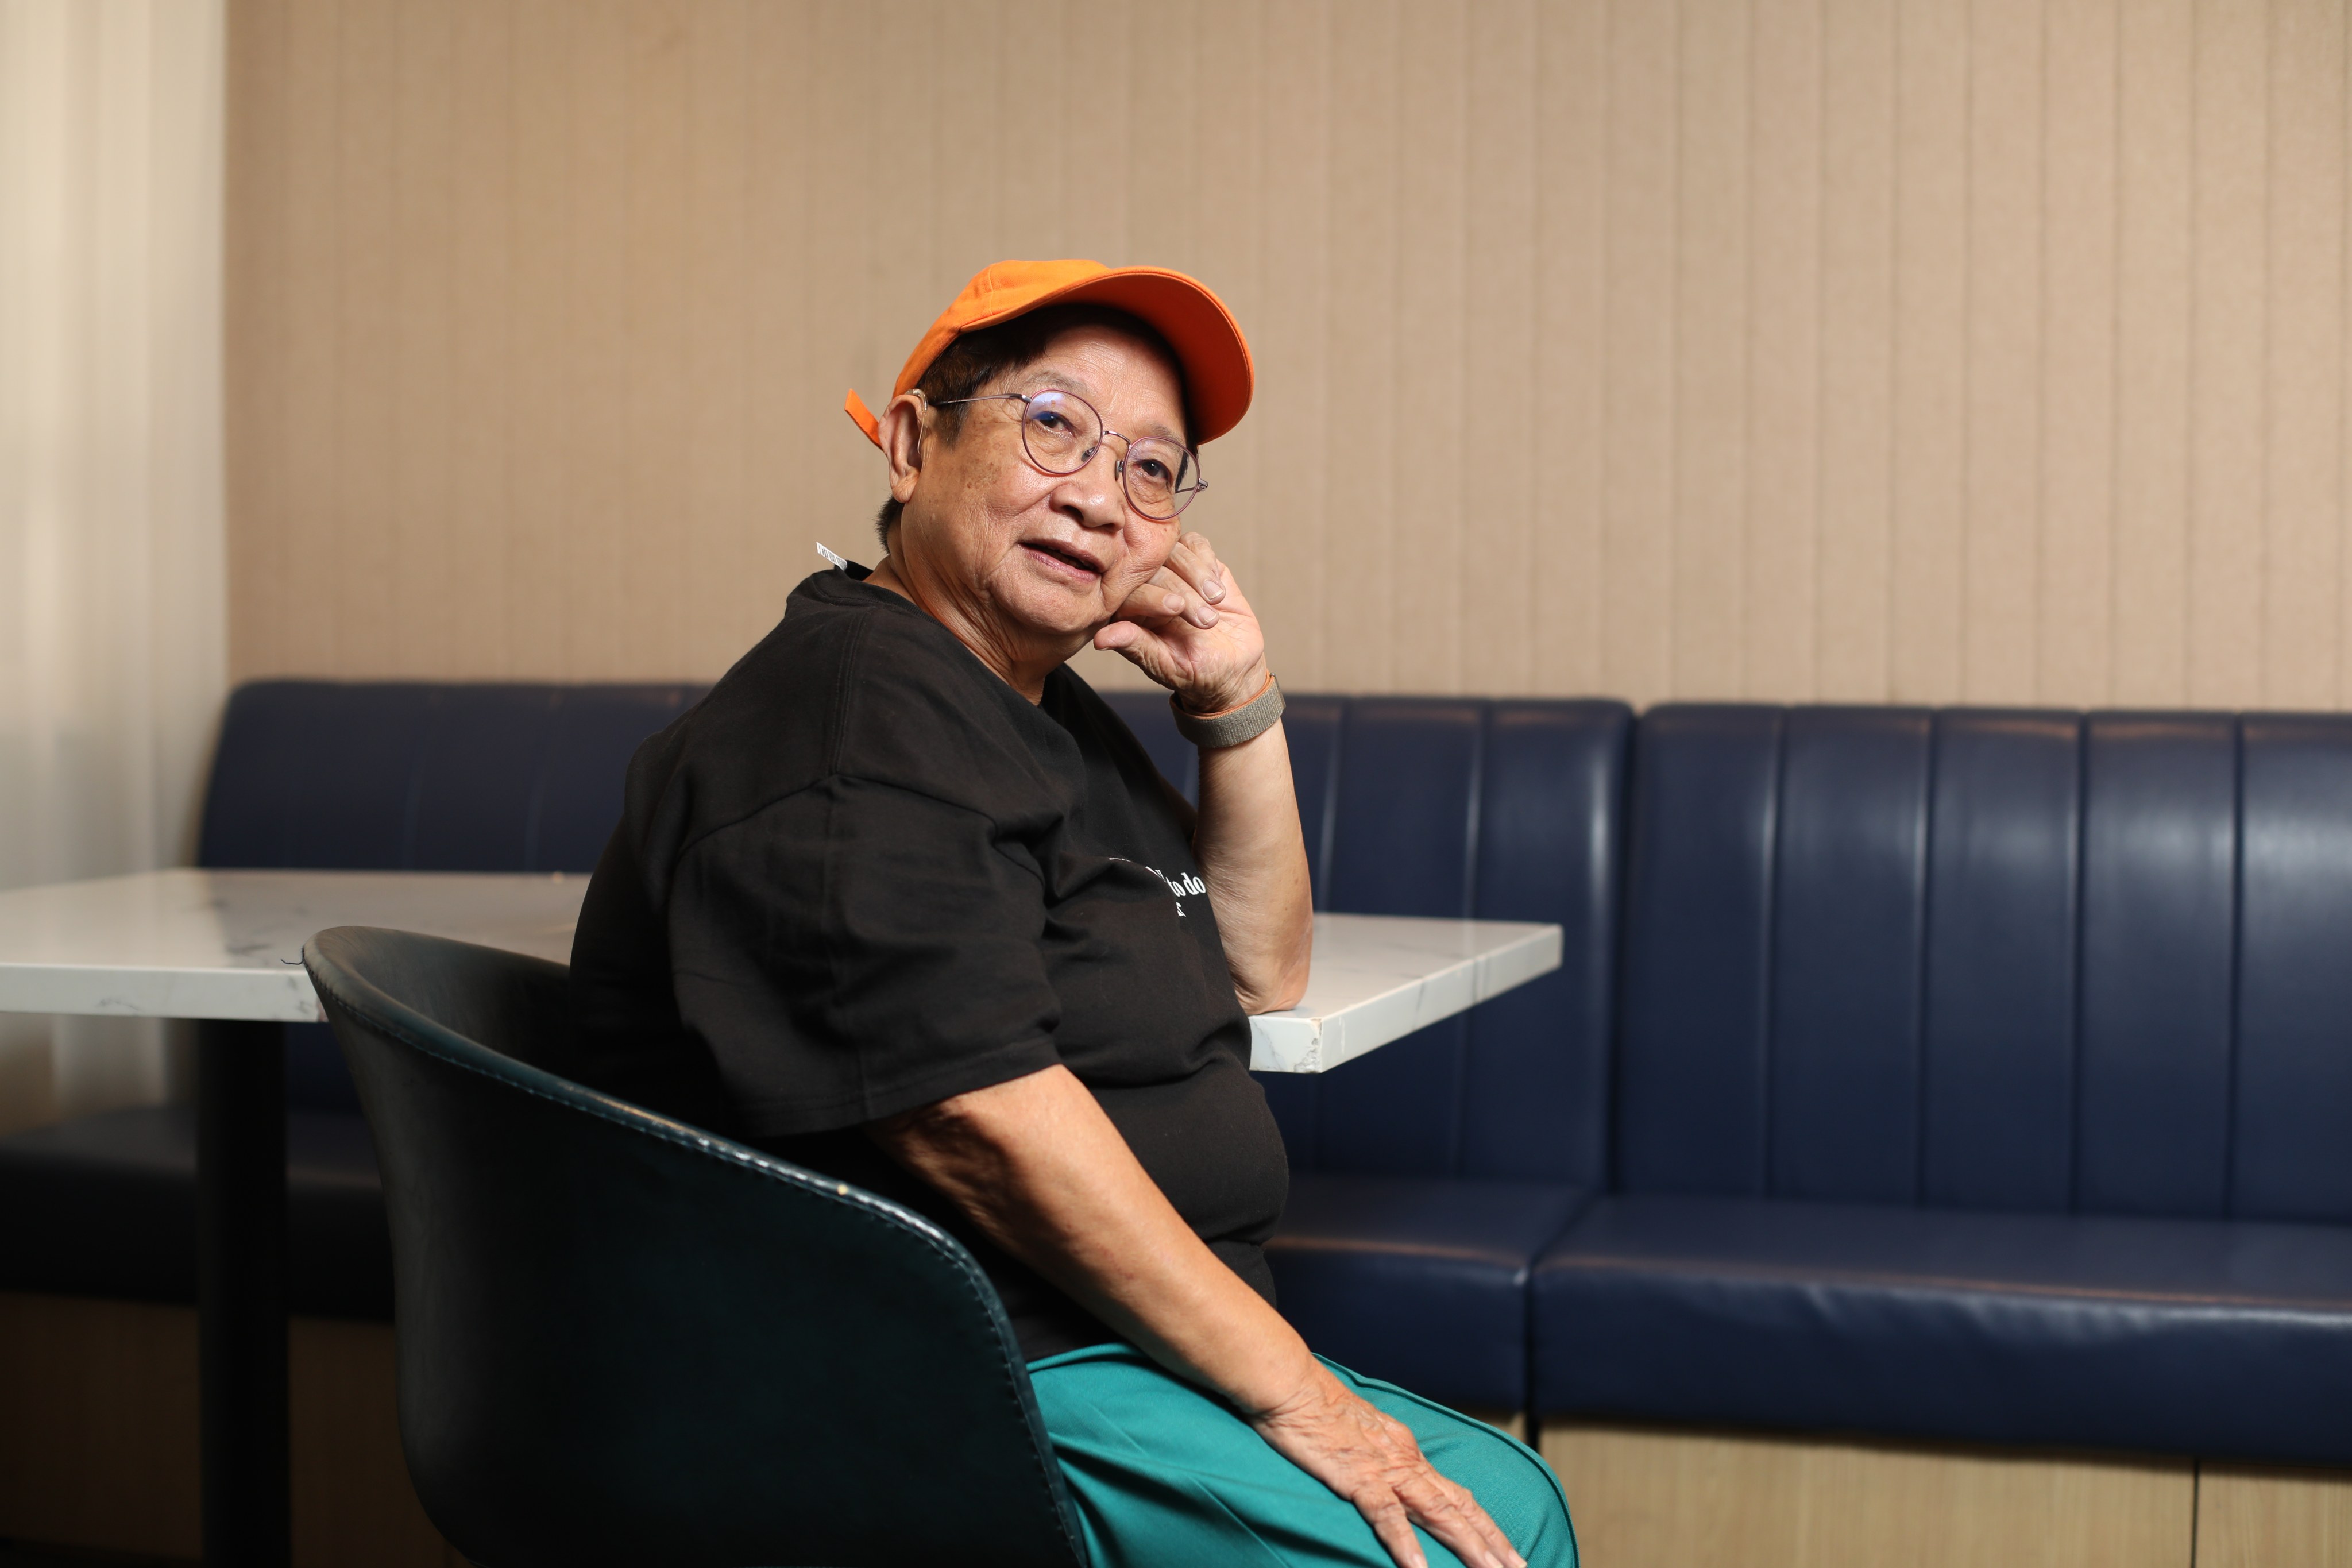 Vicki Ooi, born in Malaysia in 1941, learned at school the power a play’’s director has - and became one in Hong Kong, as well as a drama educator. She explains why she’s still putting on plays in her 80s. Photo: Xiaomei Chen